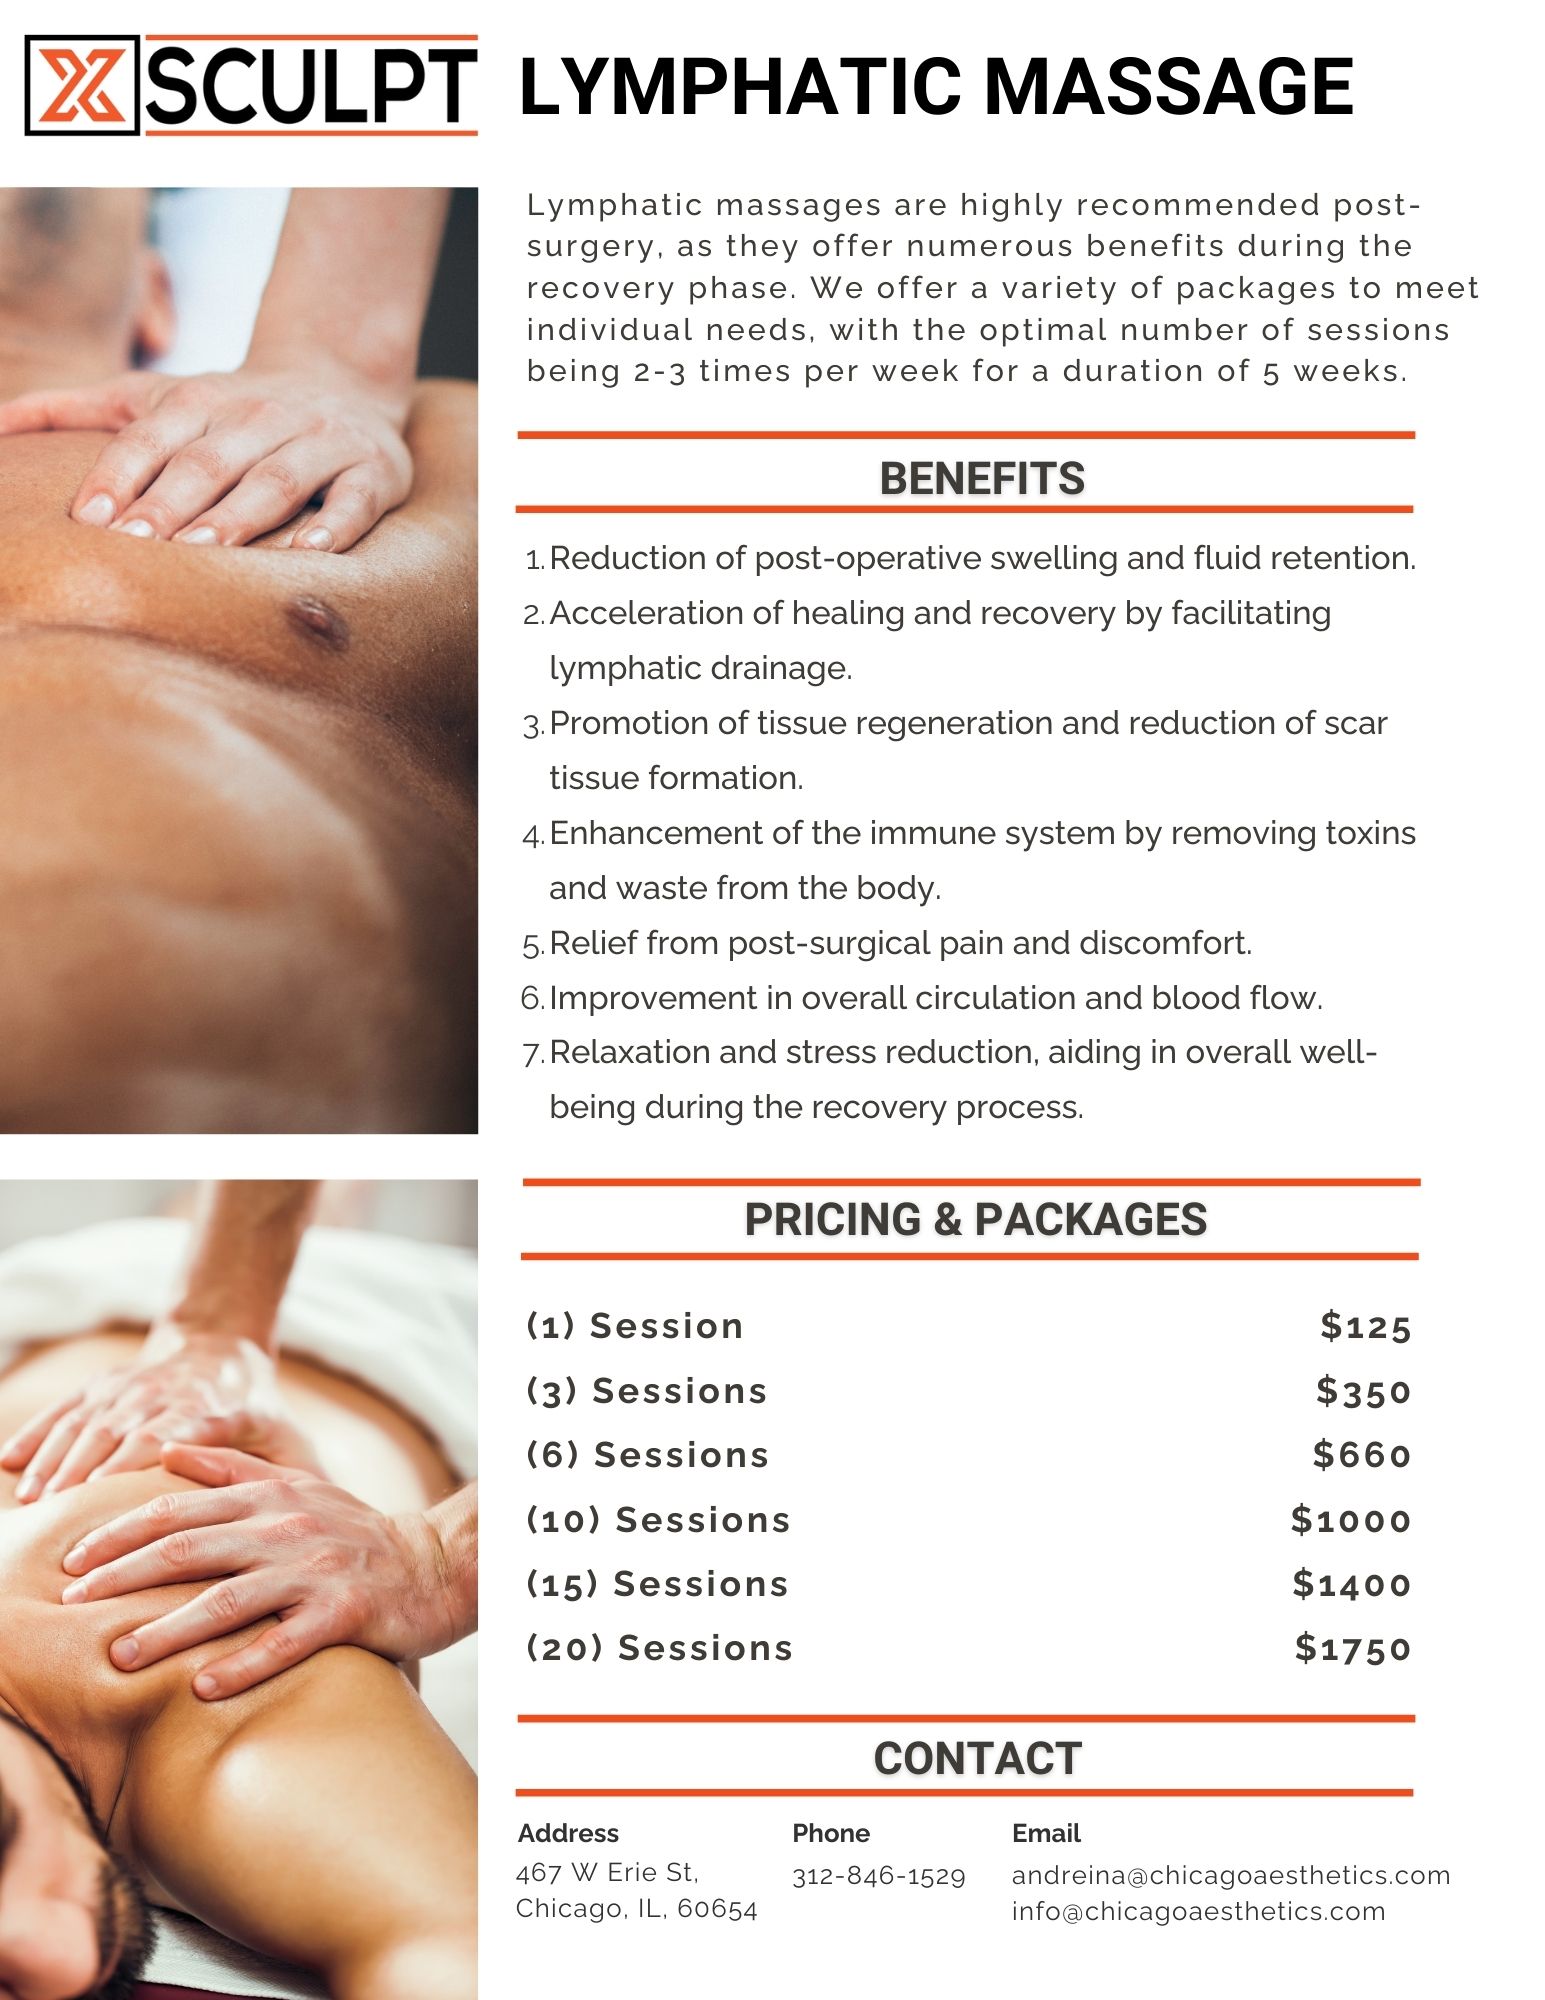 Lymphatic drainage massage pricing in Chicago Illinois